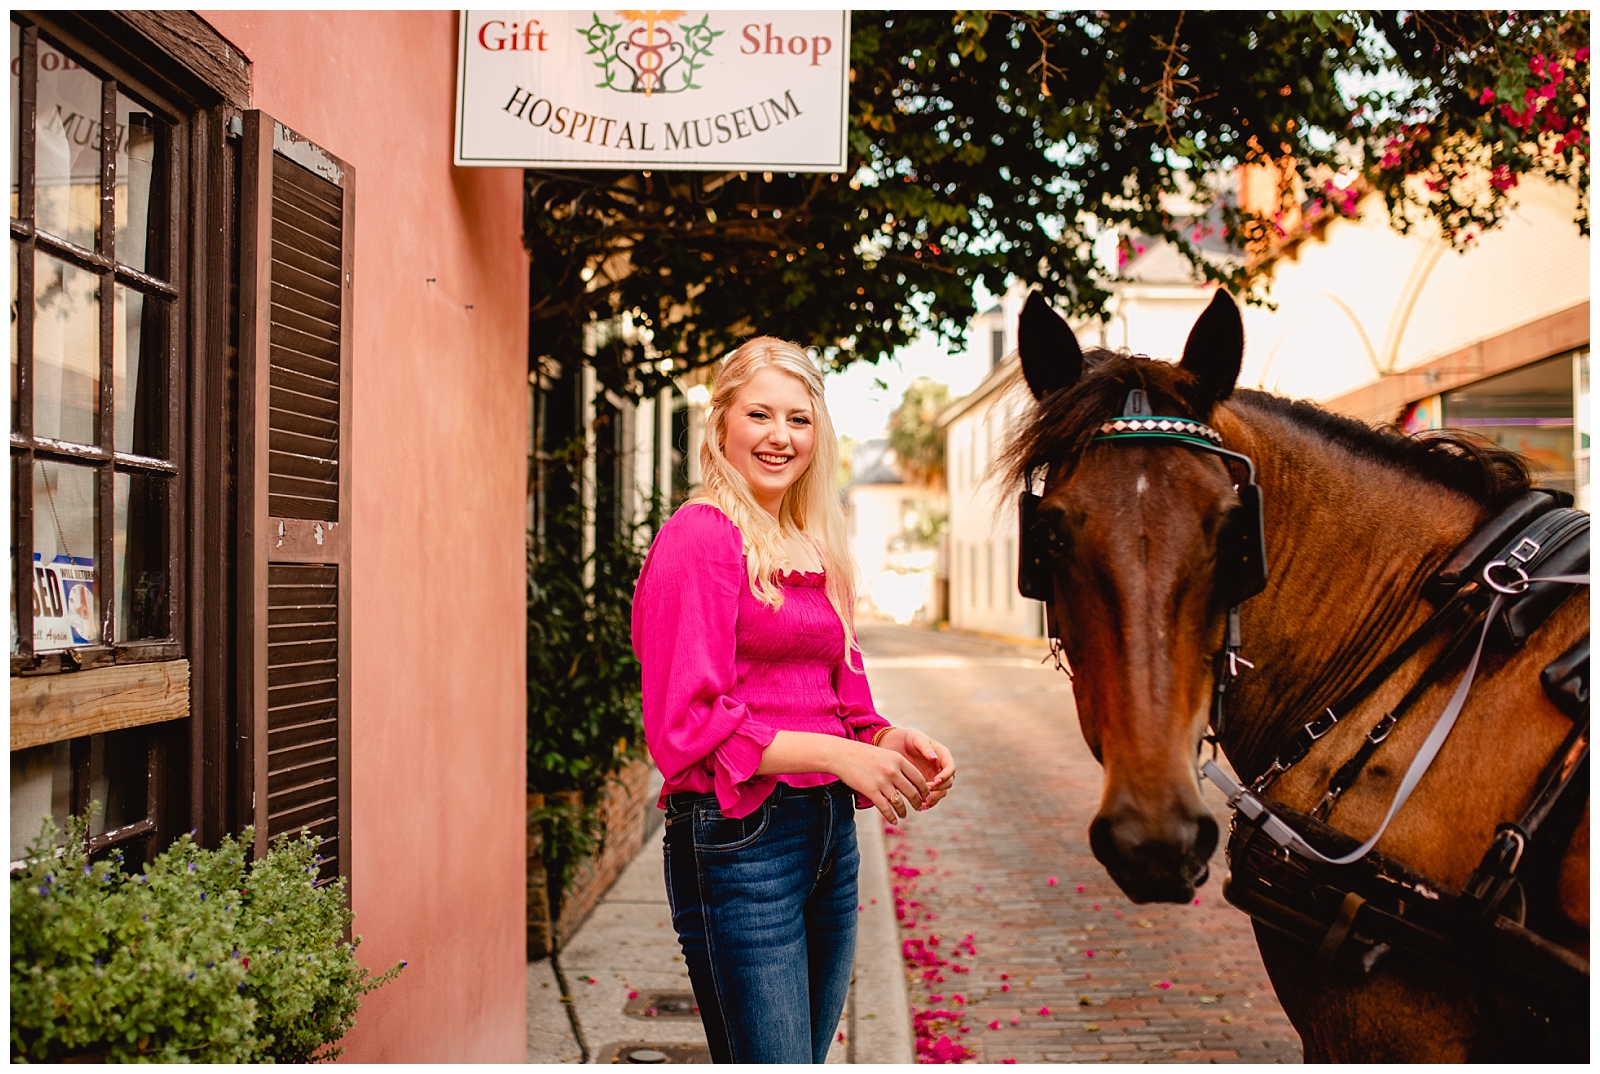 Downtown St Augustine street for senior portraits. Senior photo outfit ideas, hot pink shirt with cheetah heels.